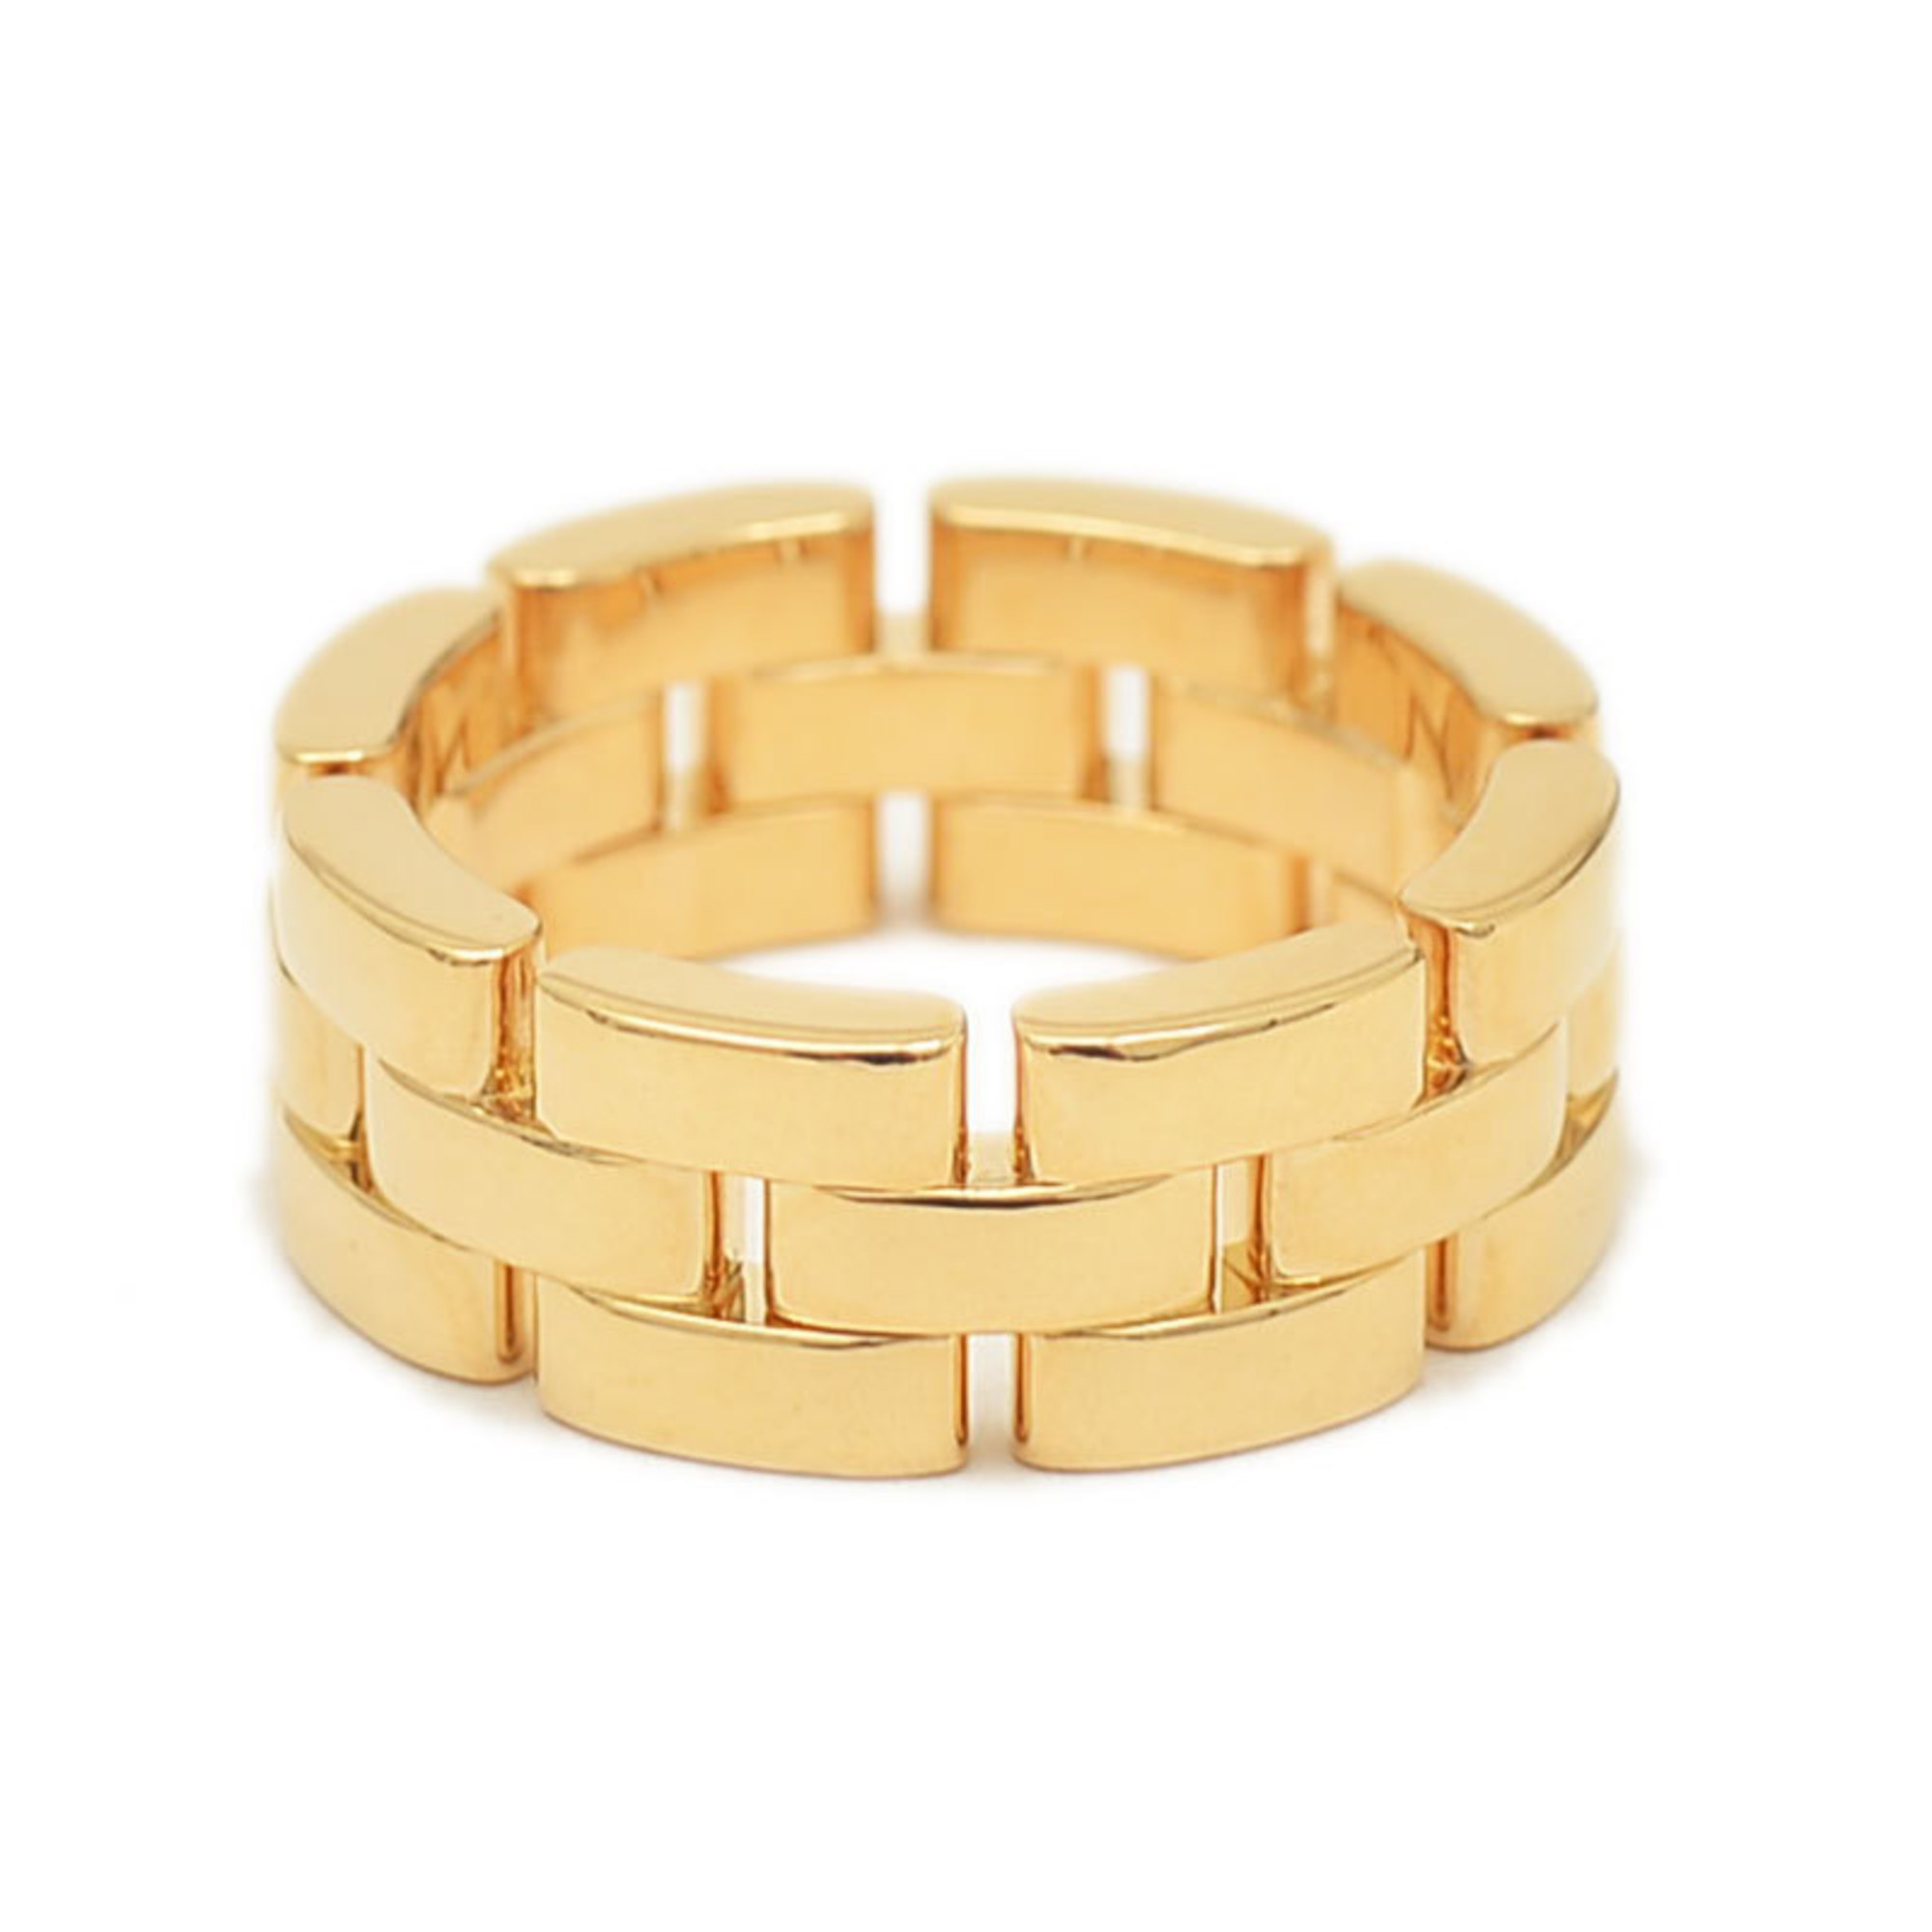 Cartier Maillon Panthere Ring 3 Row K18YG #52 B42306